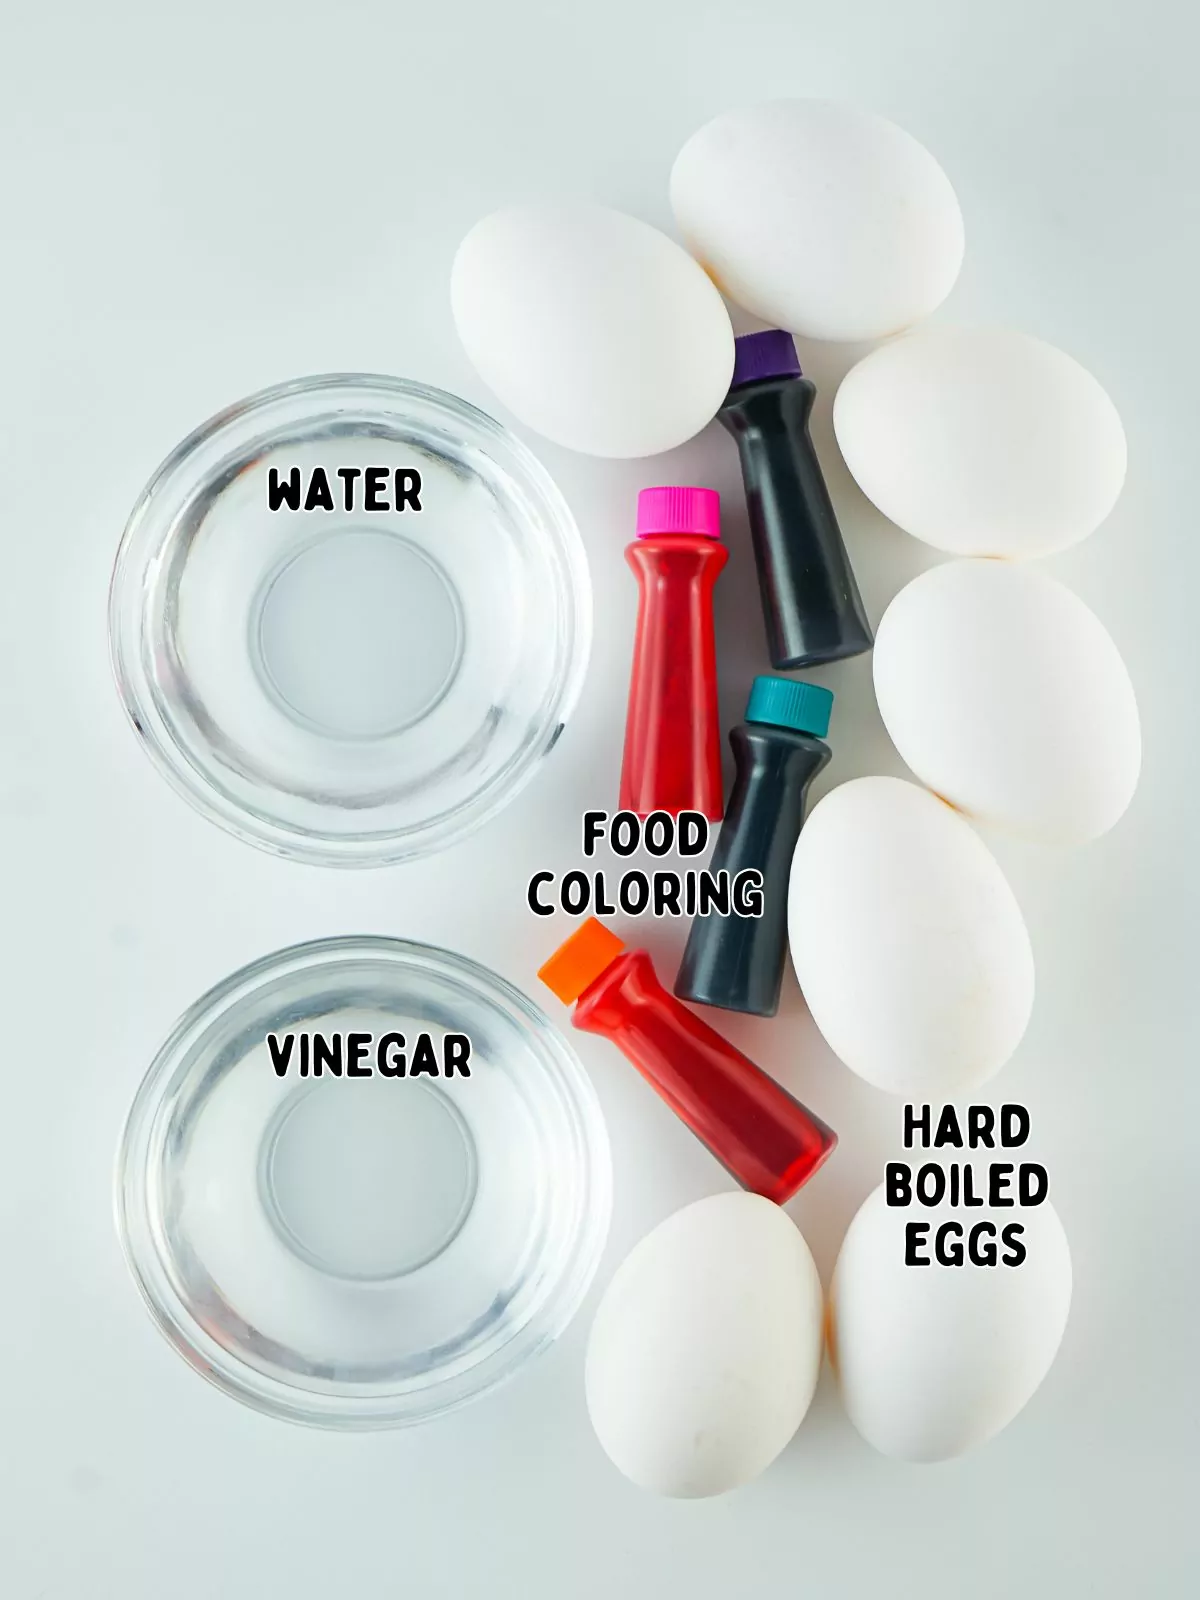 ingredients for colored eggs with food coloring.